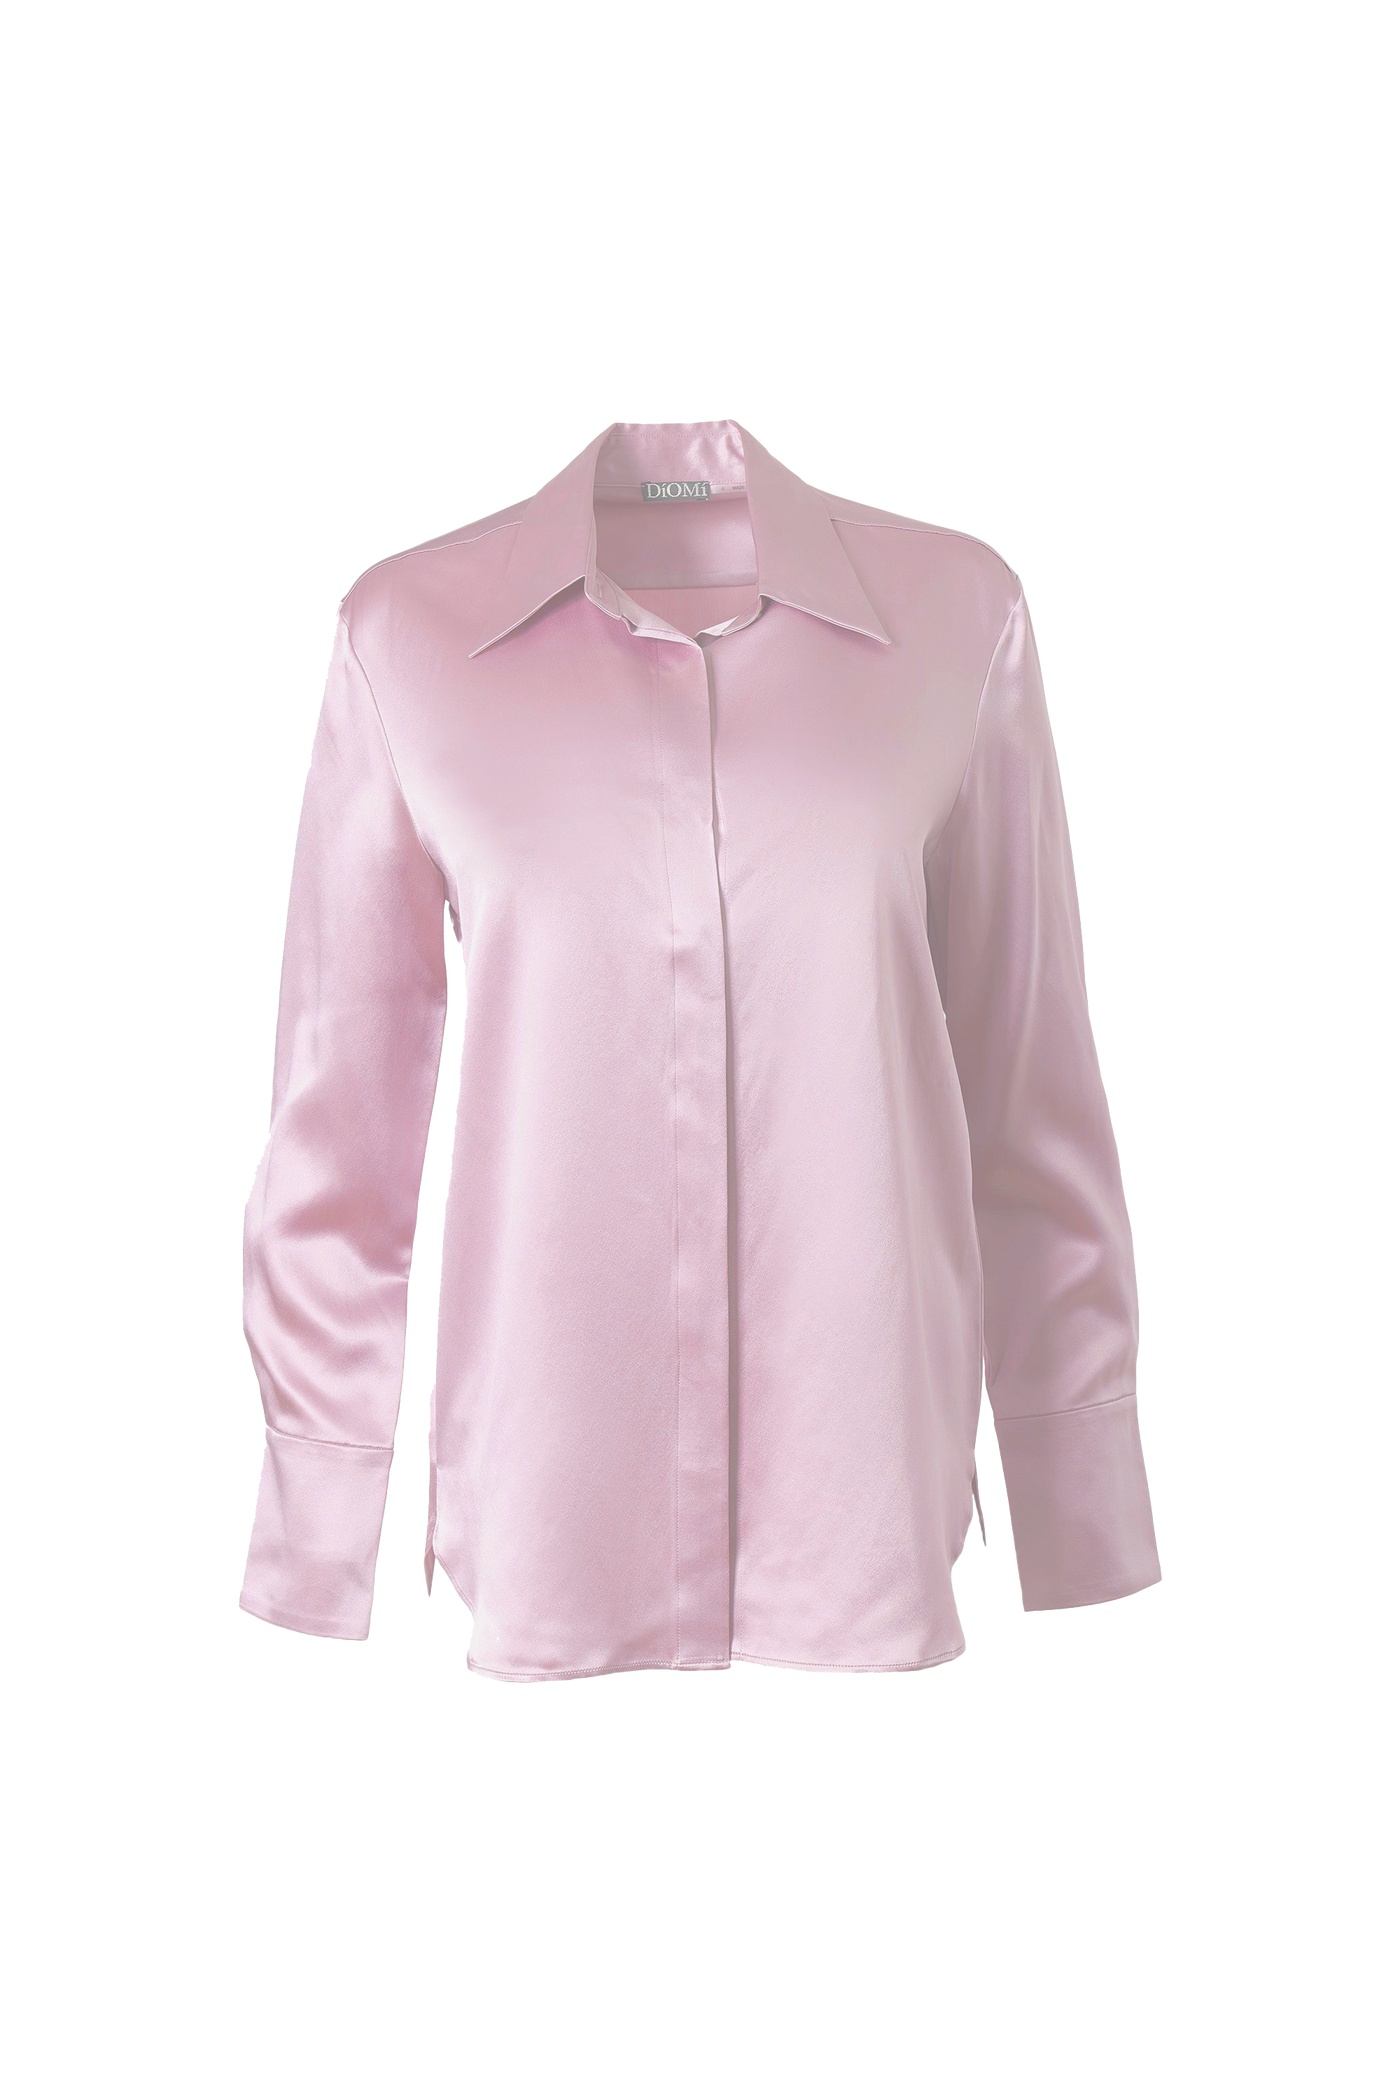 Classic Button Down Blouse In Princess Pink